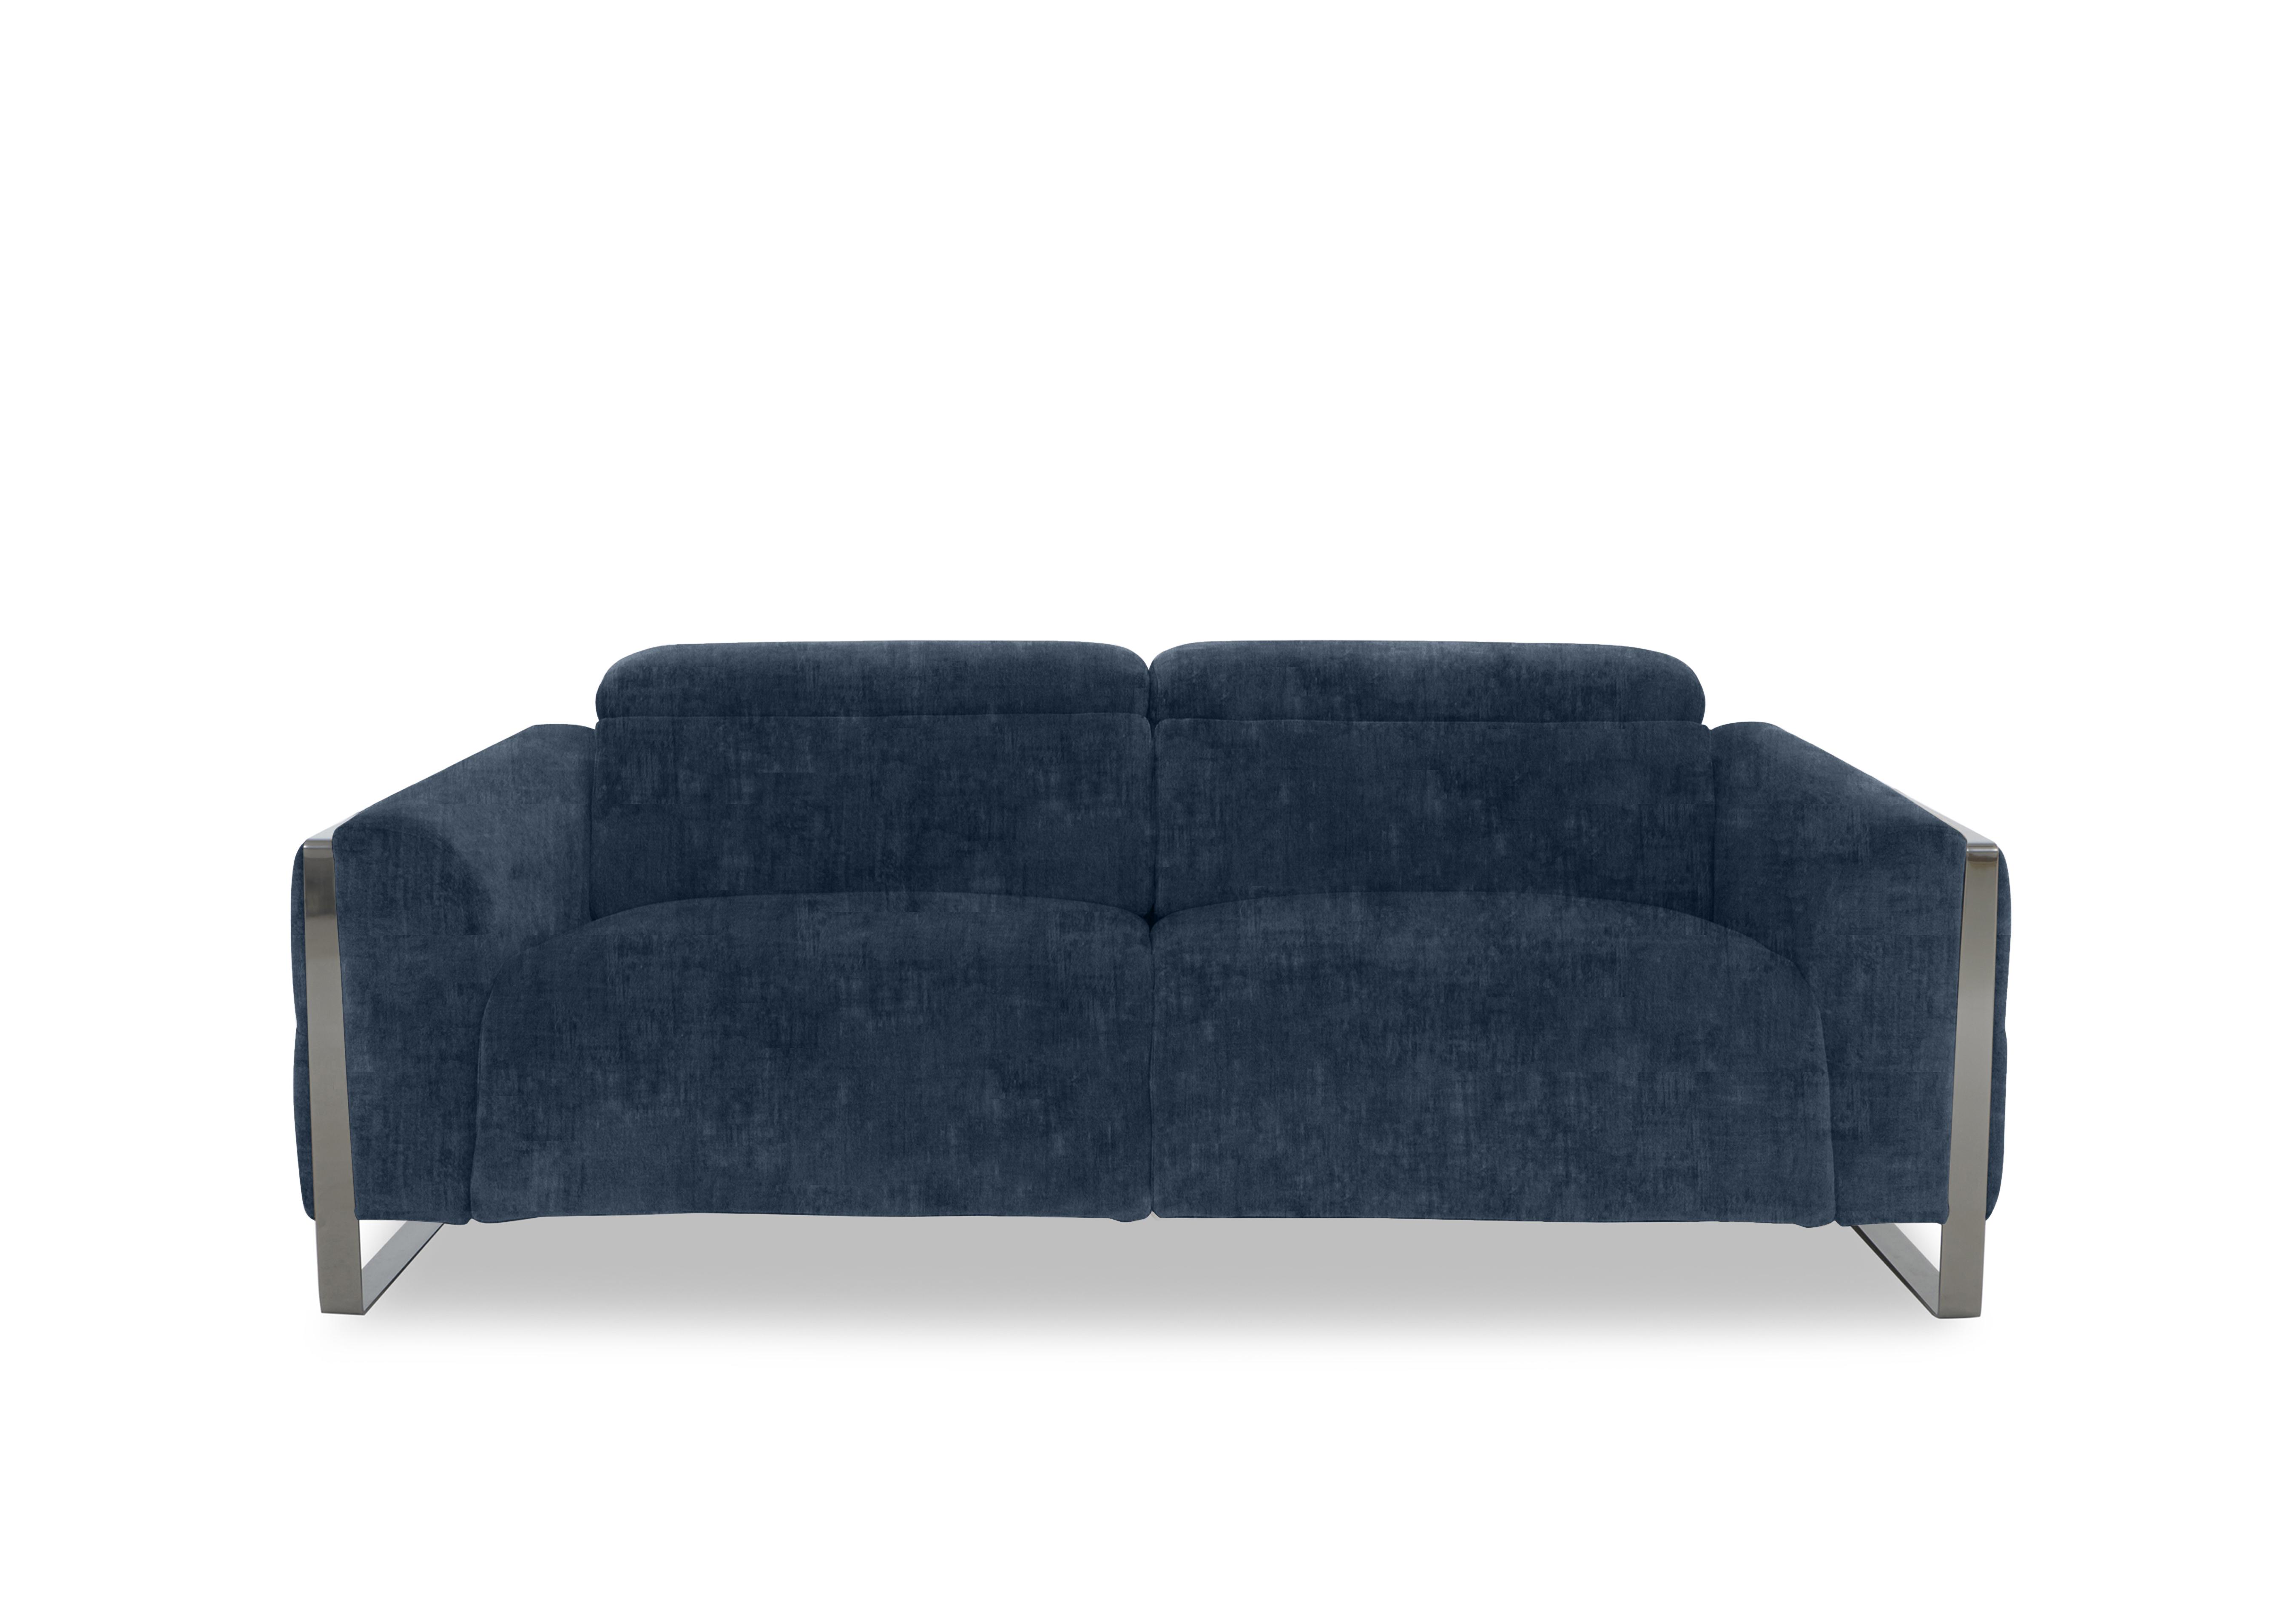 Gisella Fabric 3 Seater Sofa in Heritage Airforce 52000 on Furniture Village